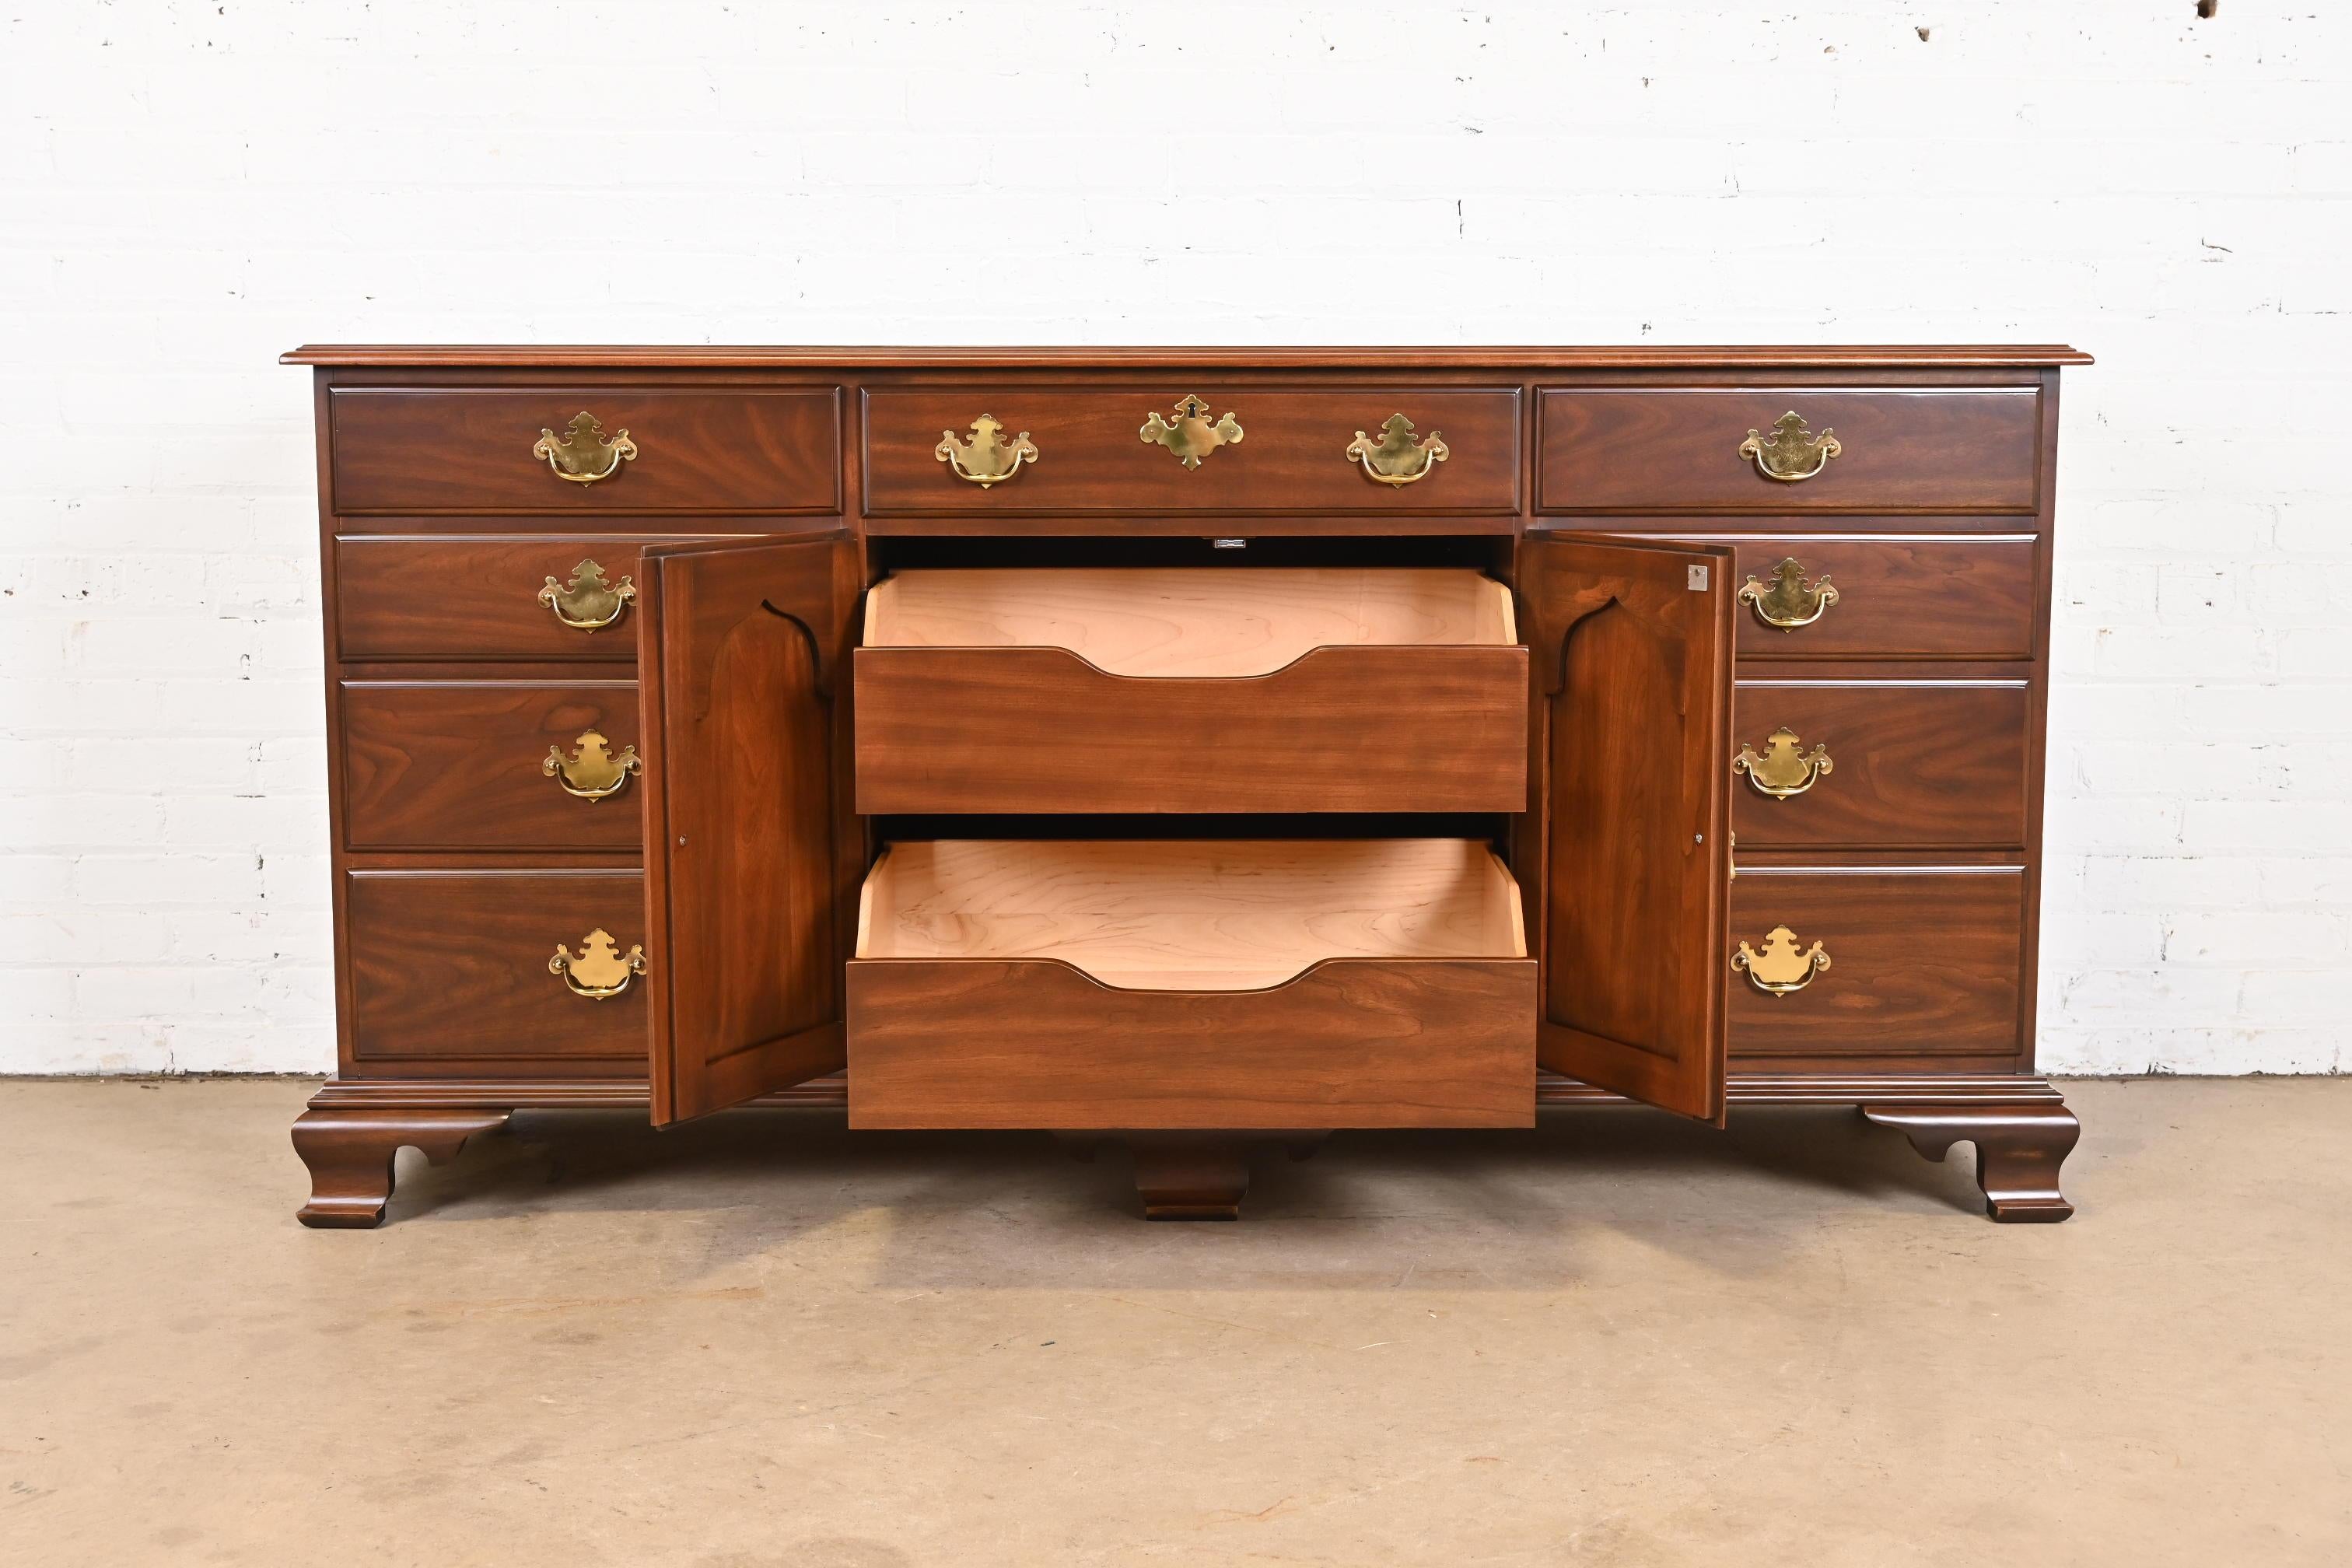 Harden Furniture Georgian Solid Cherry Wood Long Dresser, Newly Restored For Sale 4